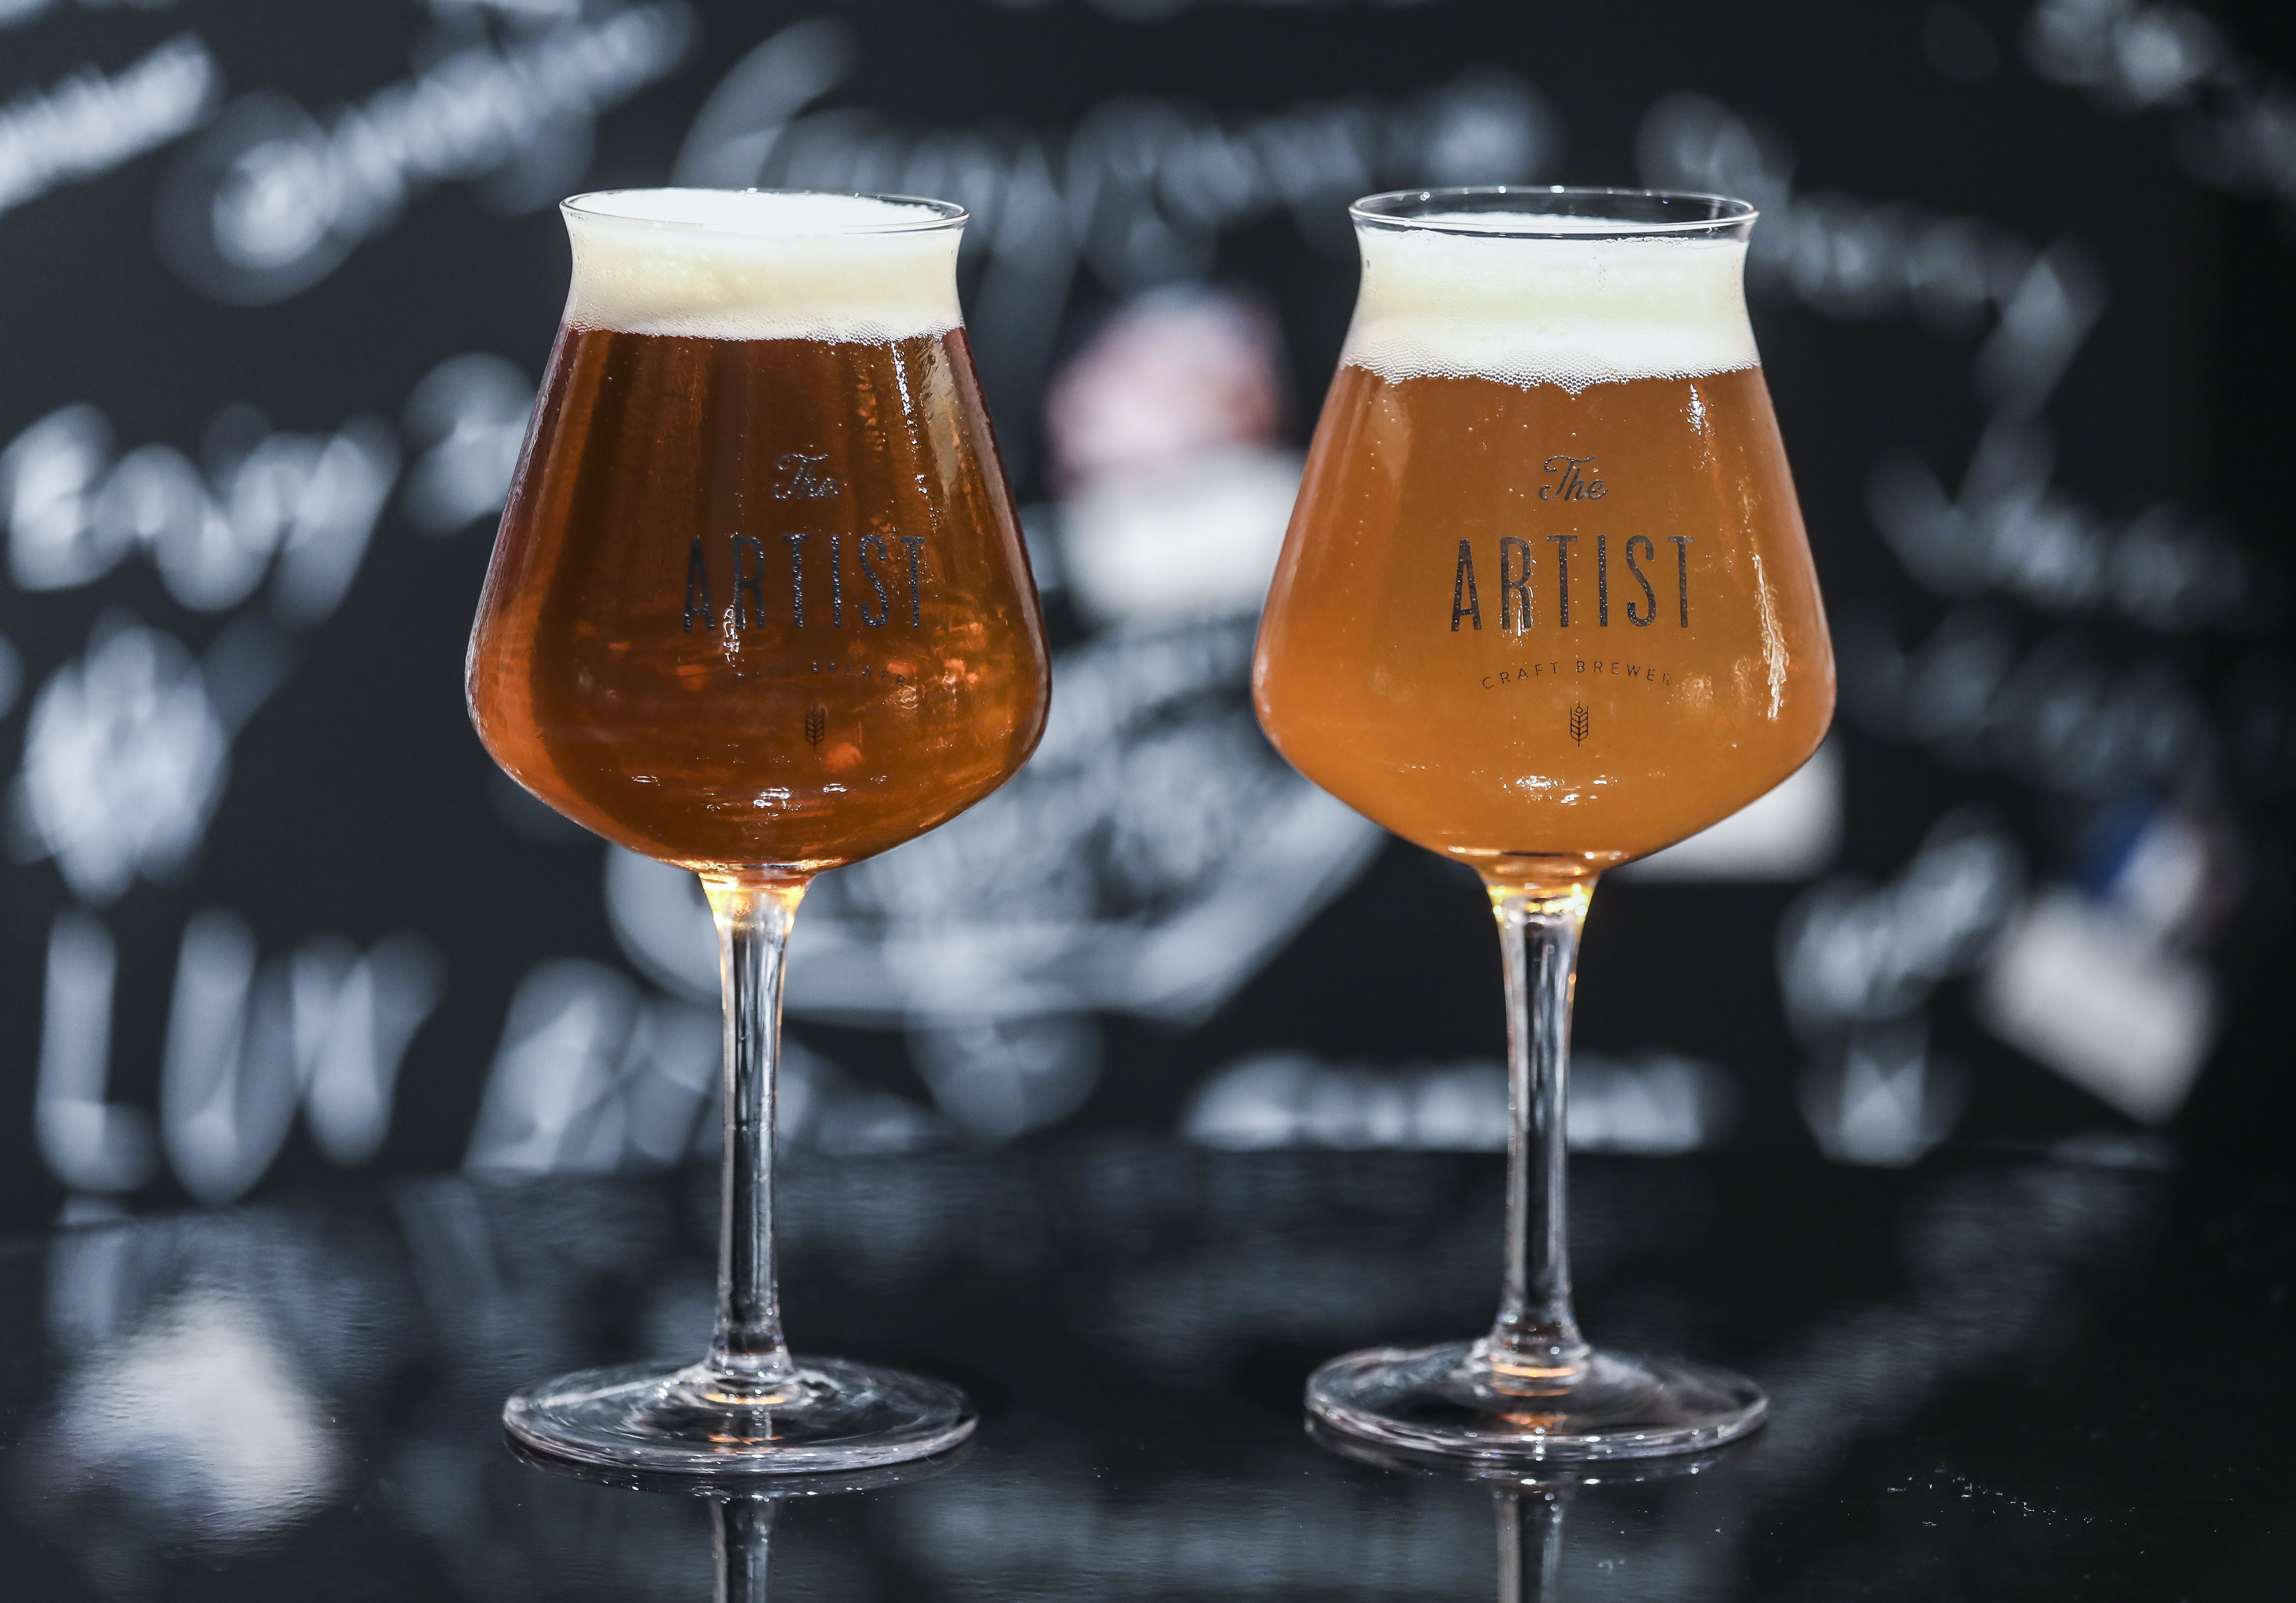 The IPA and Blond craft beers available at The Artist House in Causeway Bay. Photo: Jonathan Wong